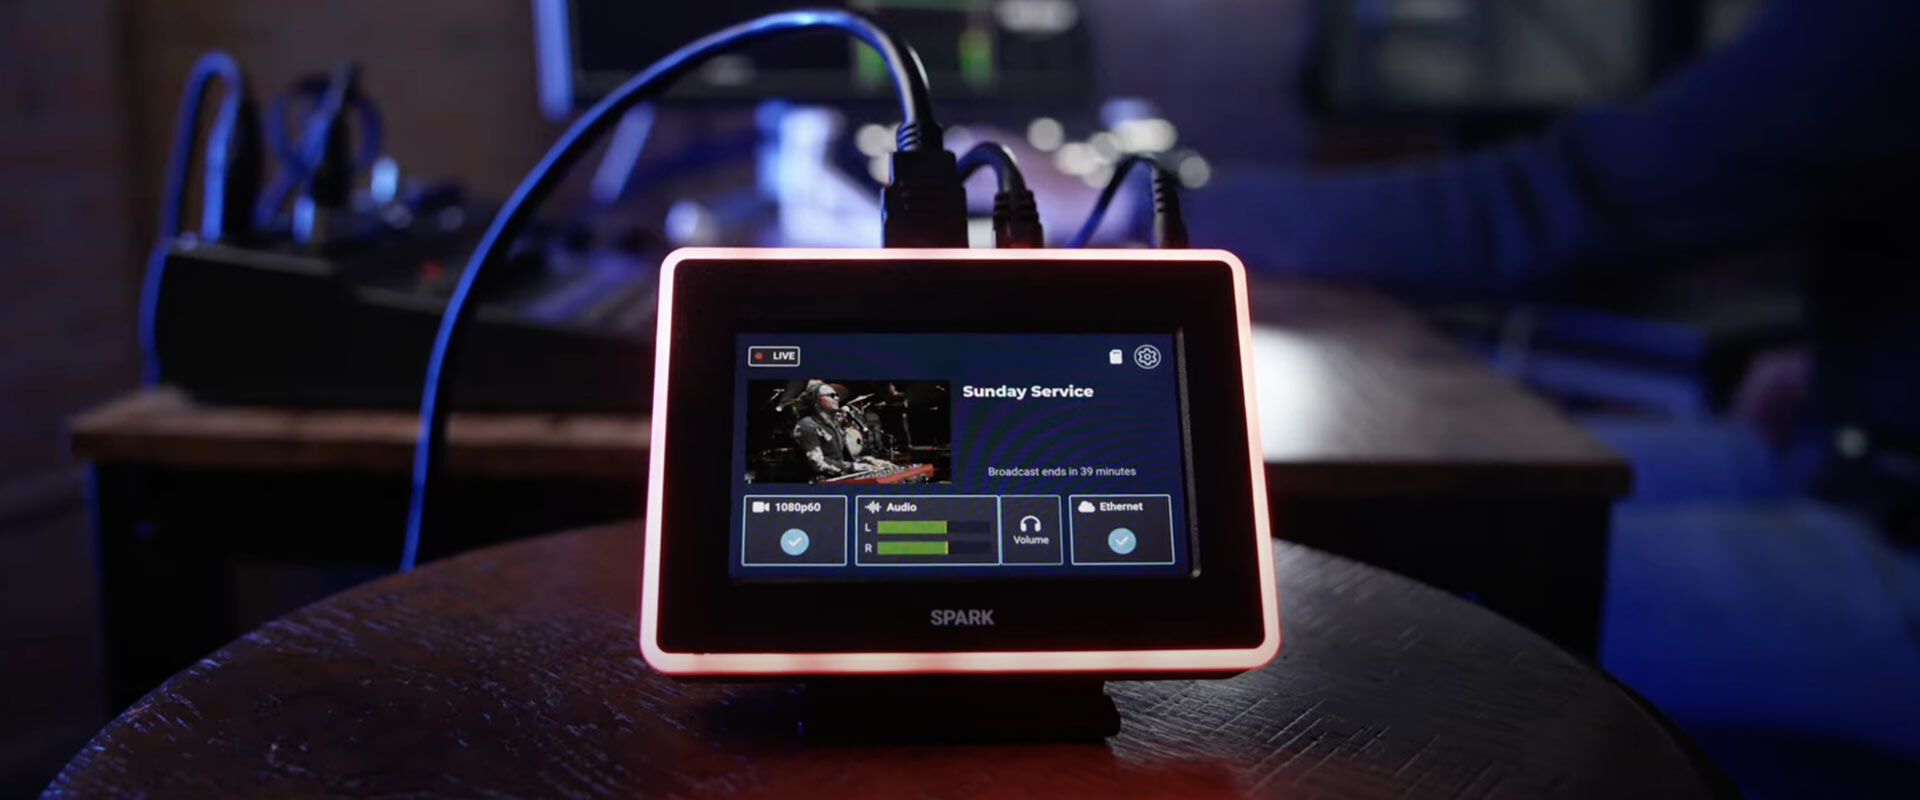 BoxCast Spark encoder in use with on-screen monitoring interface illuminated